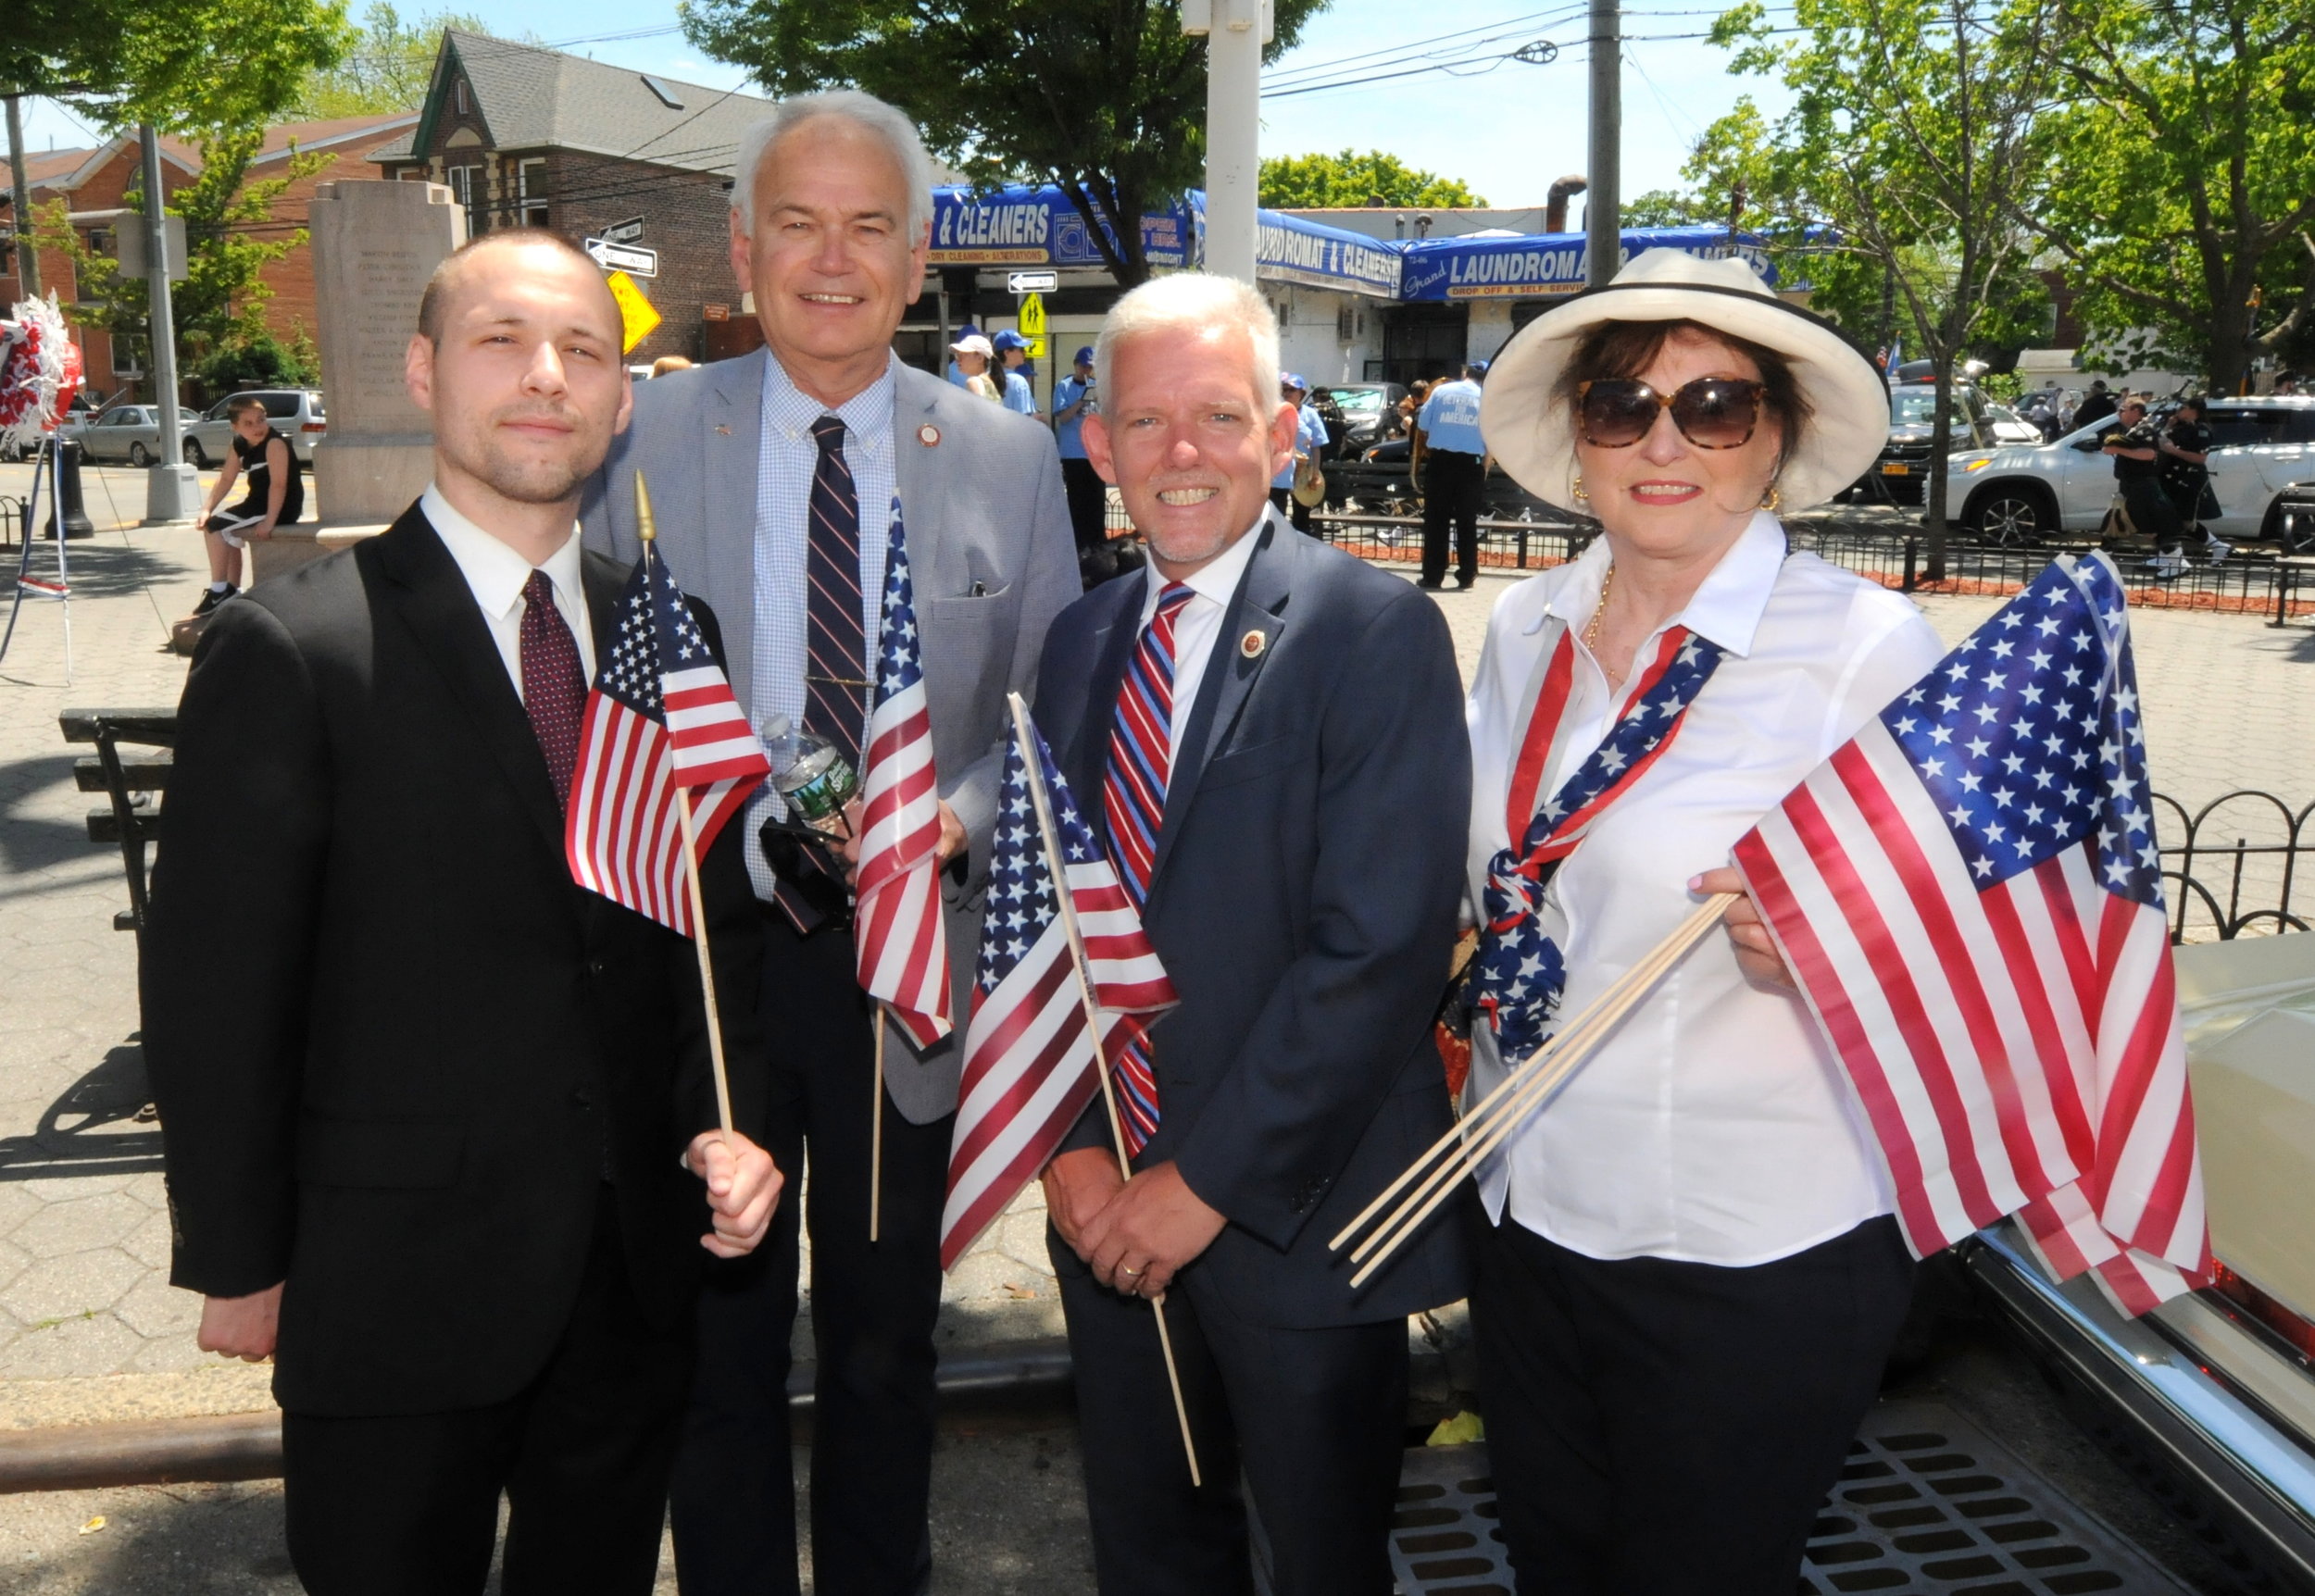  From left to right, Assemblymember Brian Barnwell, Councilmember Robert Holden, Councilmember Jimmy Van Bramer and Maryanna Zero, the president of the United Veterans and Fraternal Organizations of Maspeth.   